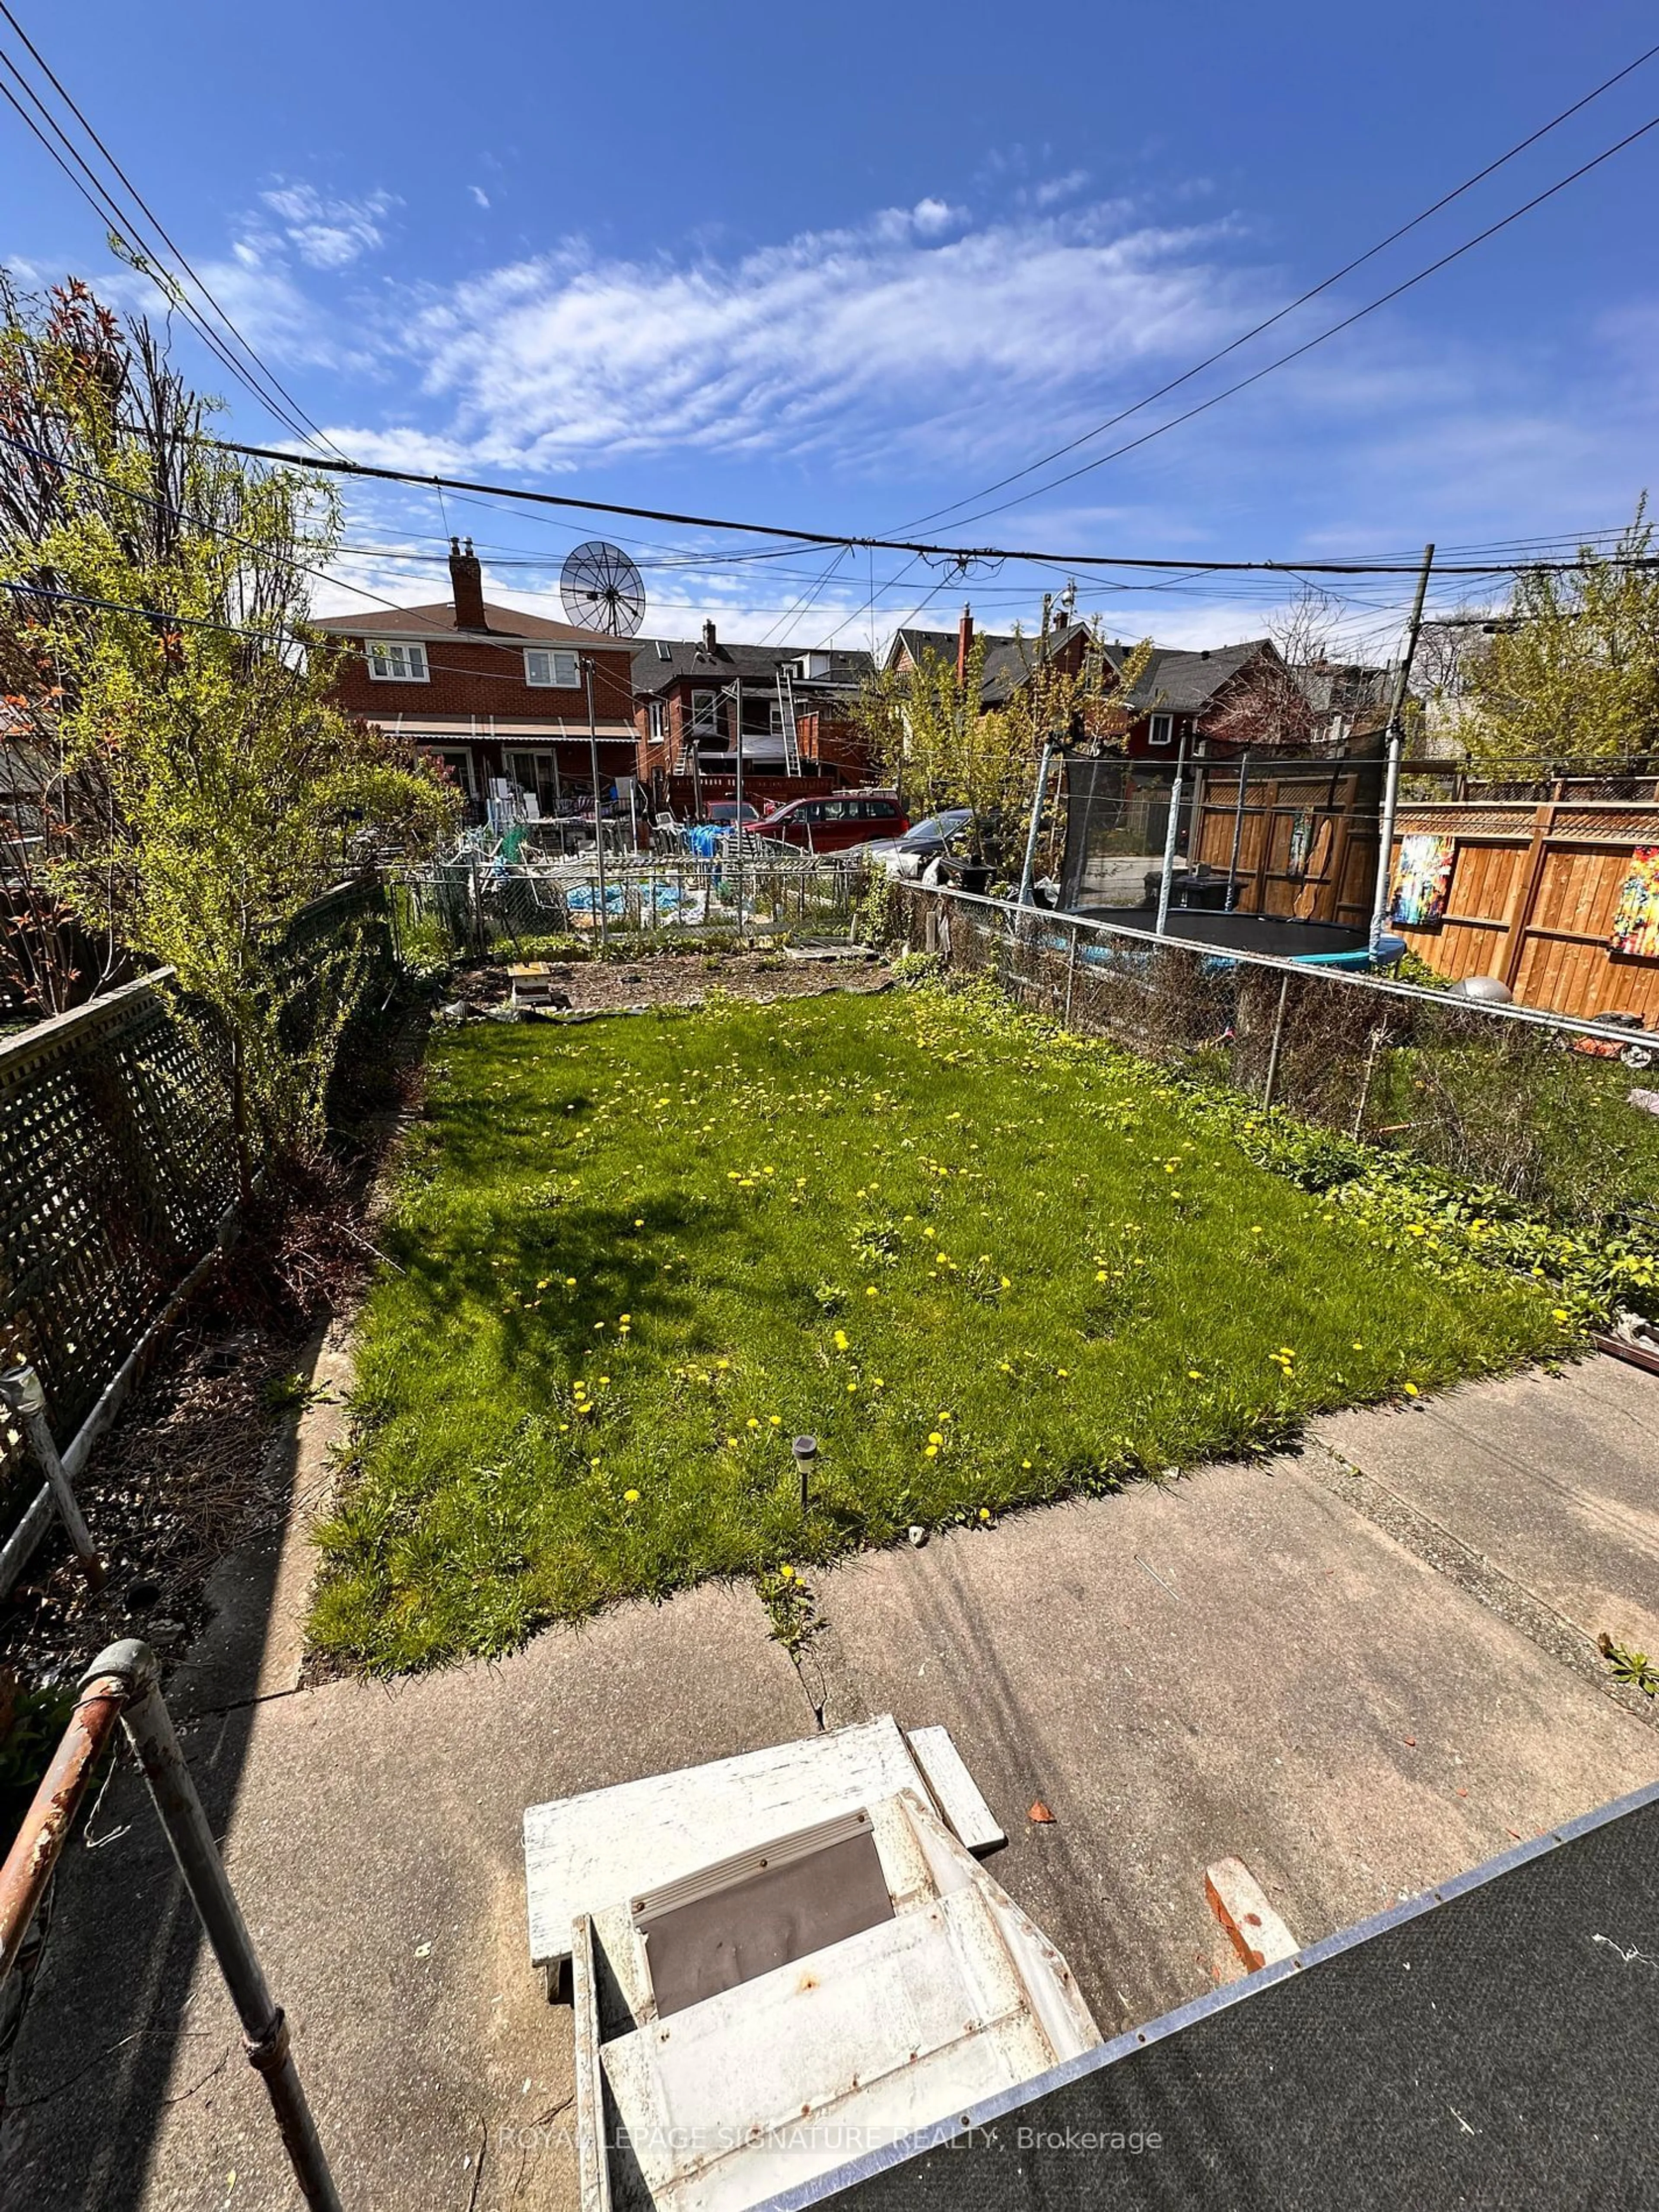 Fenced yard for 44 Carling Ave, Toronto Ontario M6G 3S1